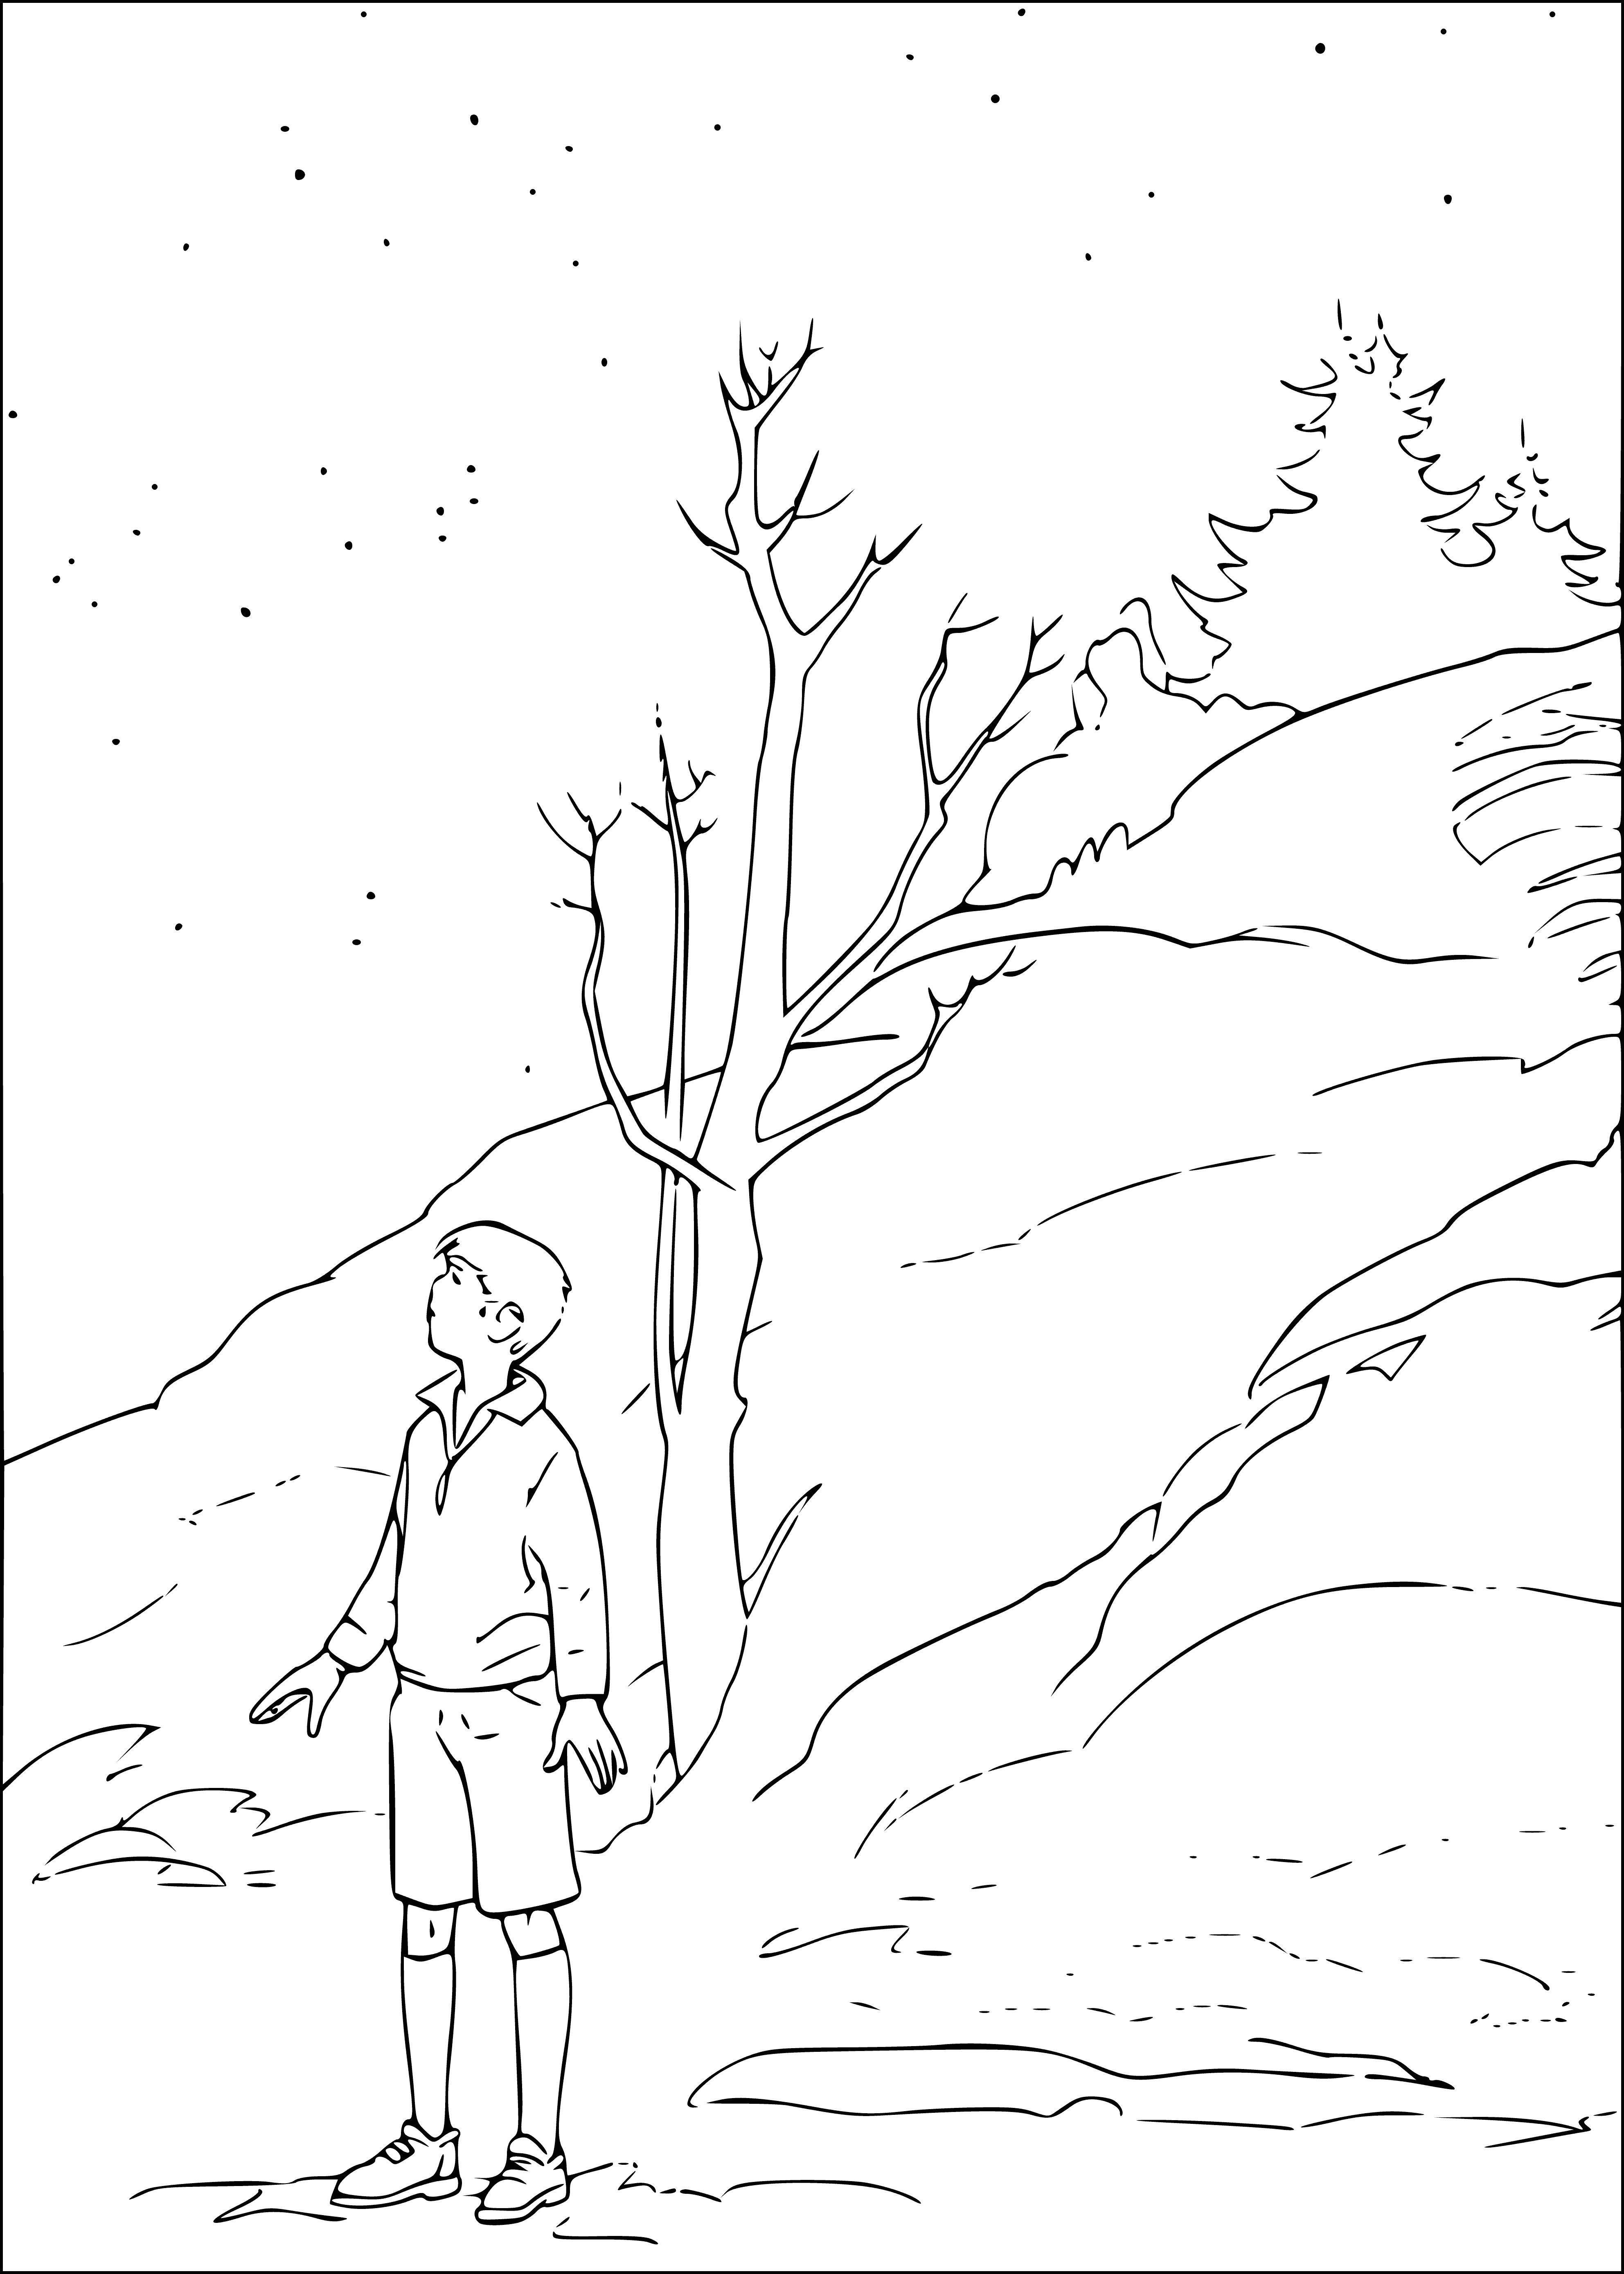 coloring page: Woman in dark dress w/ staff holding off lion & boy in background. Woman looks stern, boy scared. Trees in background